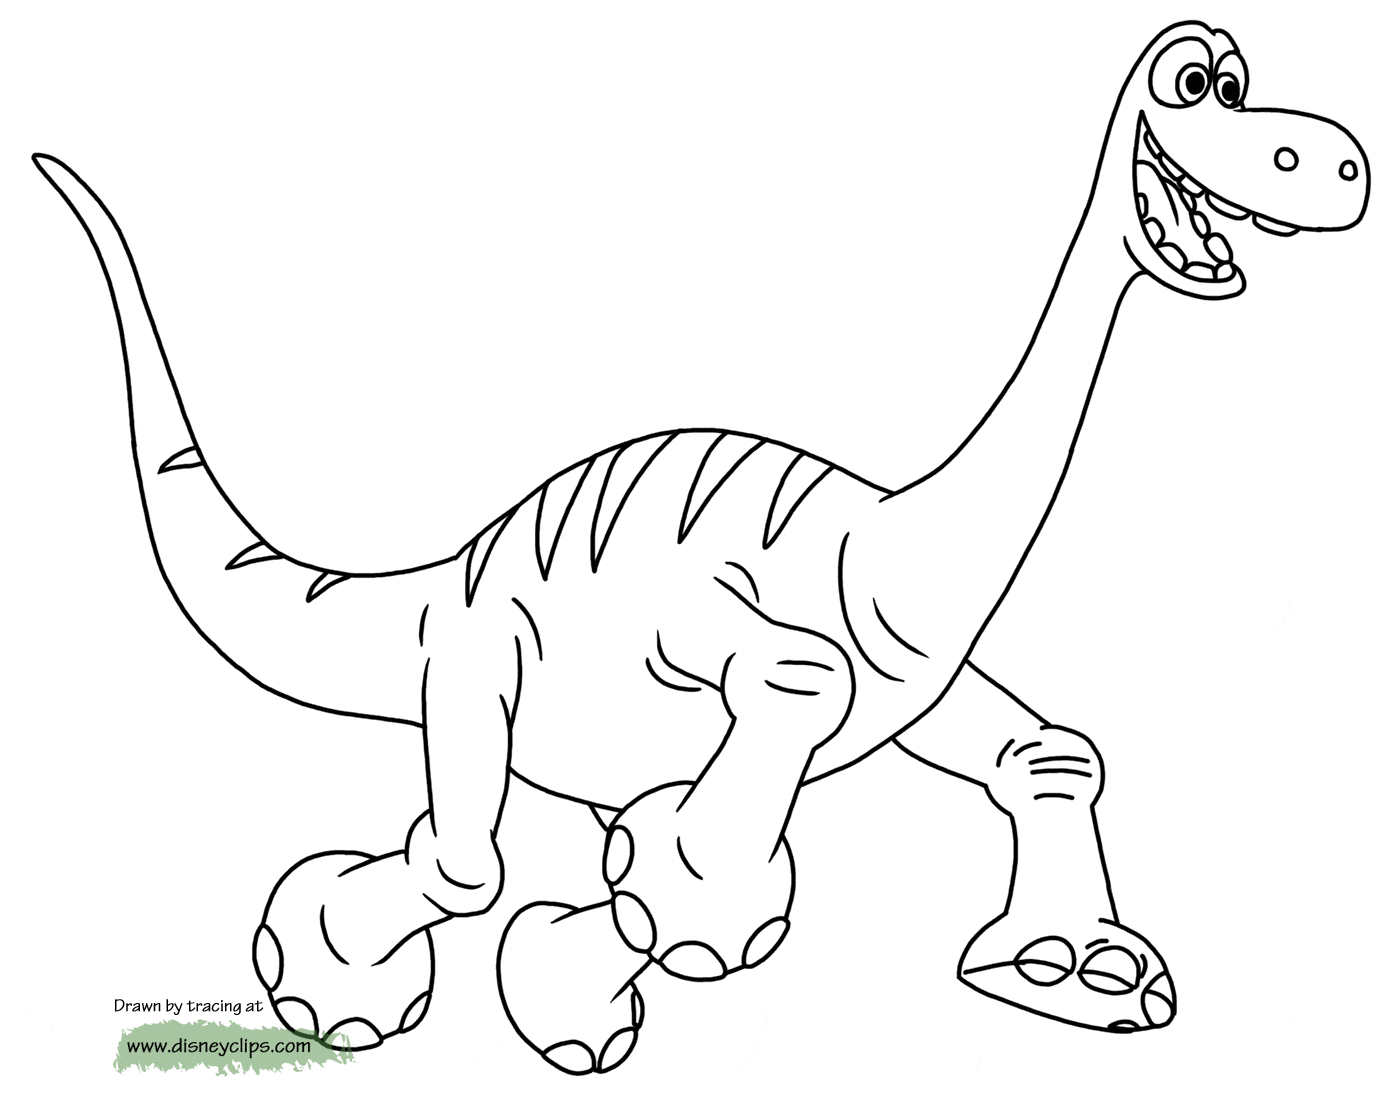 dinasour coloring pages printable dinosaur coloring pages for kids cool2bkids dinasour coloring pages 